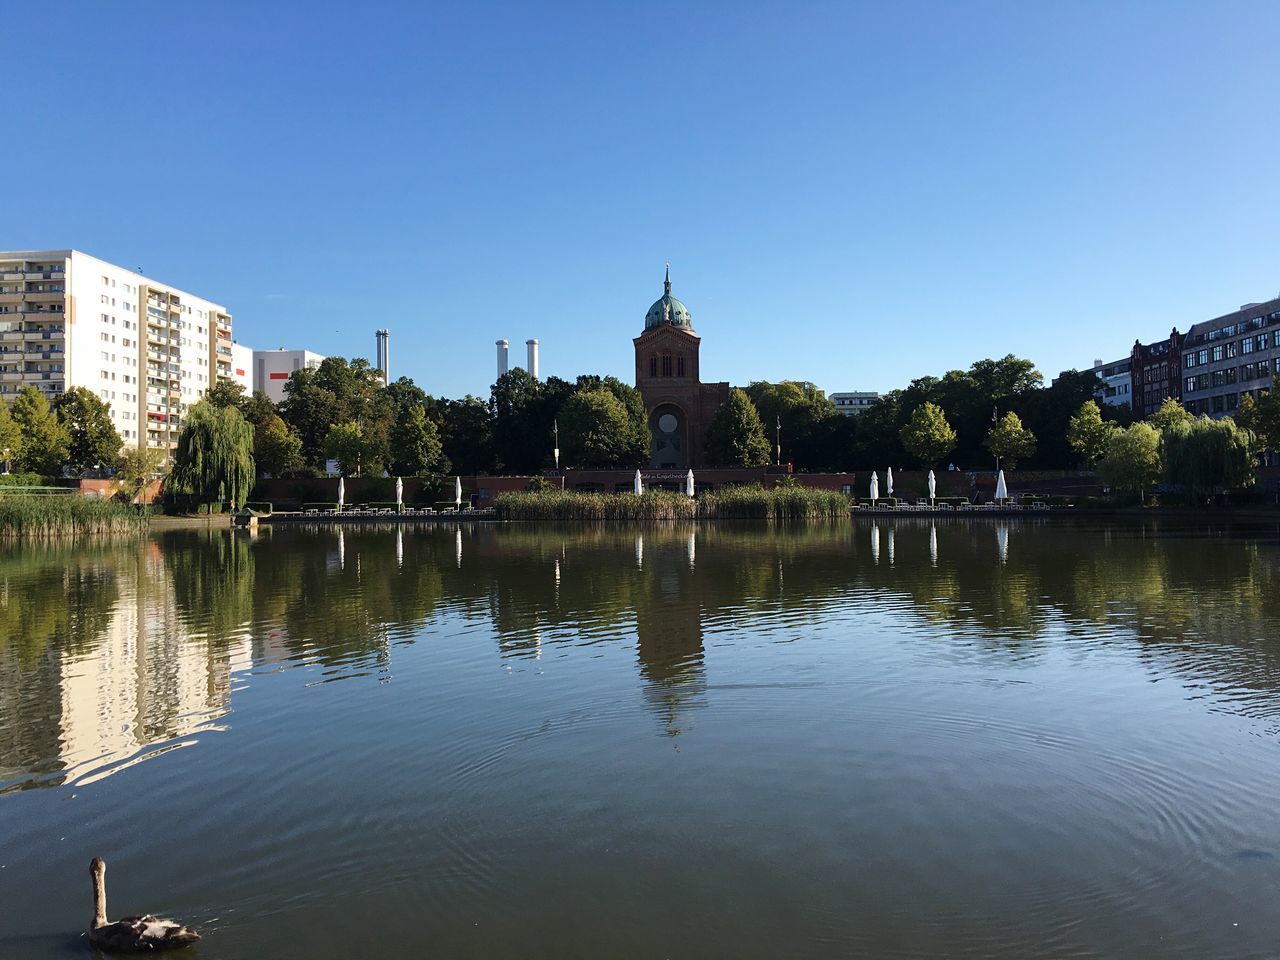 SCENIC VIEW OF CALM RIVER WITH BUILDINGS IN BACKGROUND